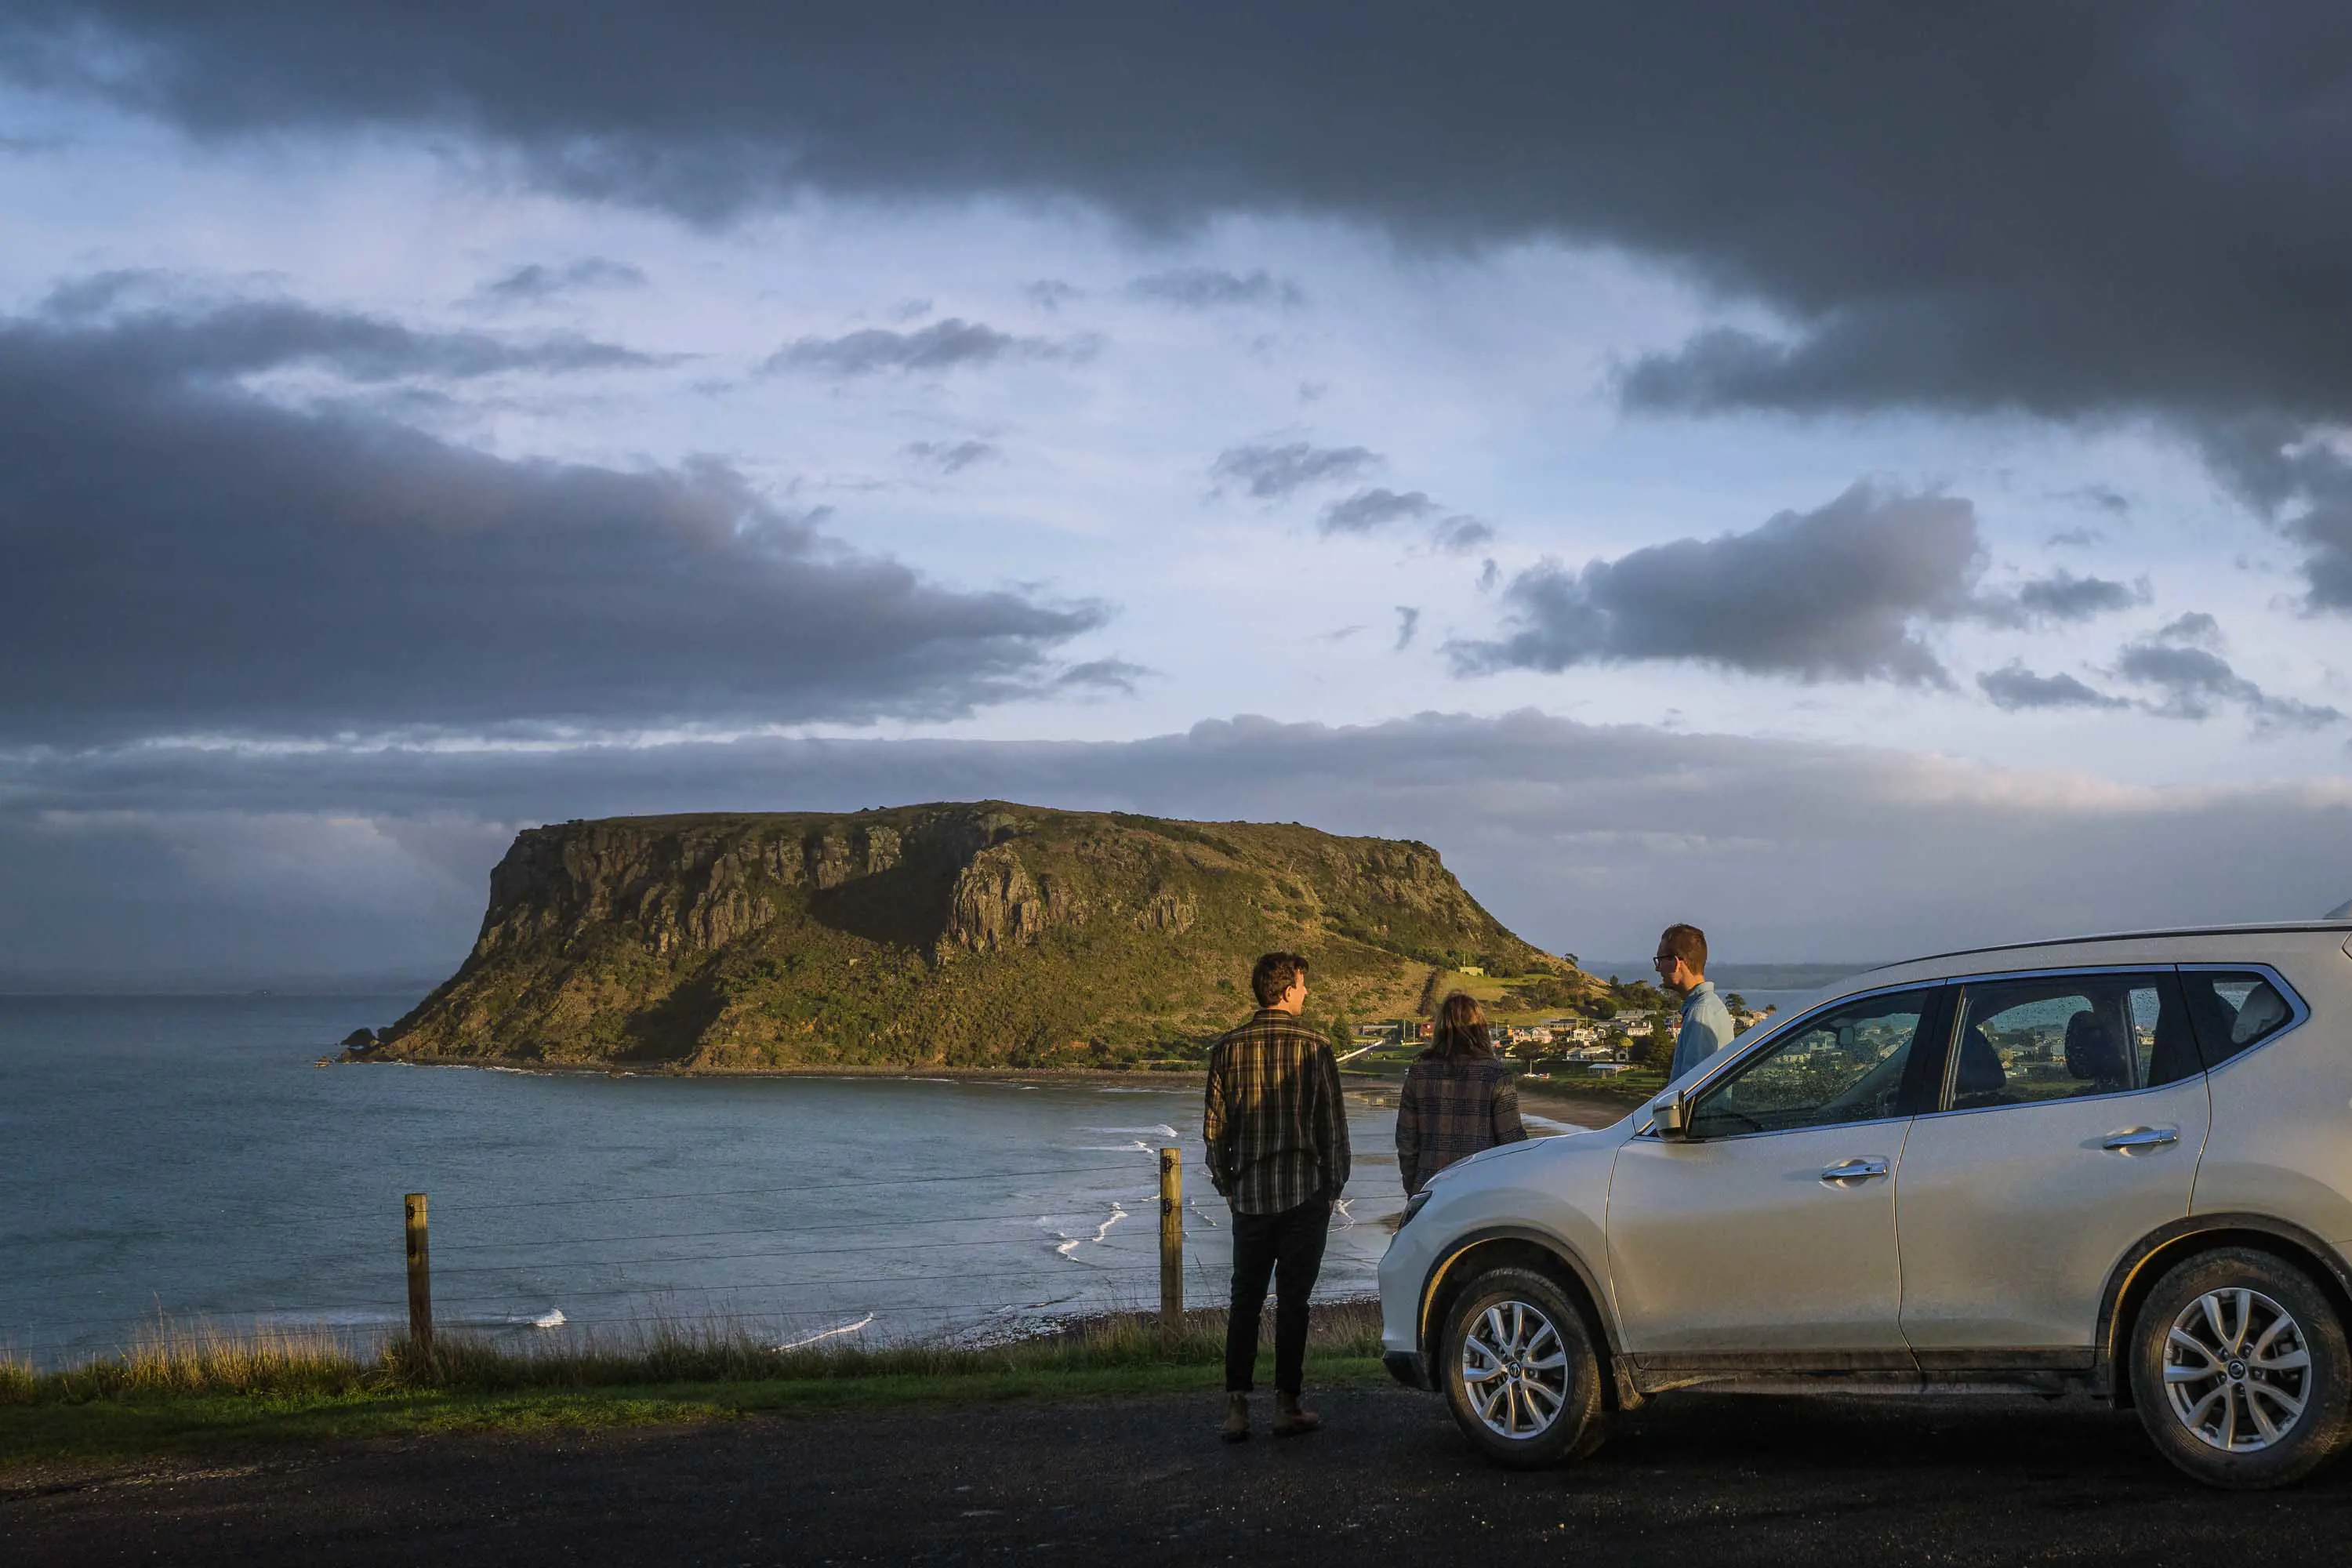 A group of three people stand in front of their silver sports utility vehicle and look out over a bay with a large, flat-topped peninsula in the background.